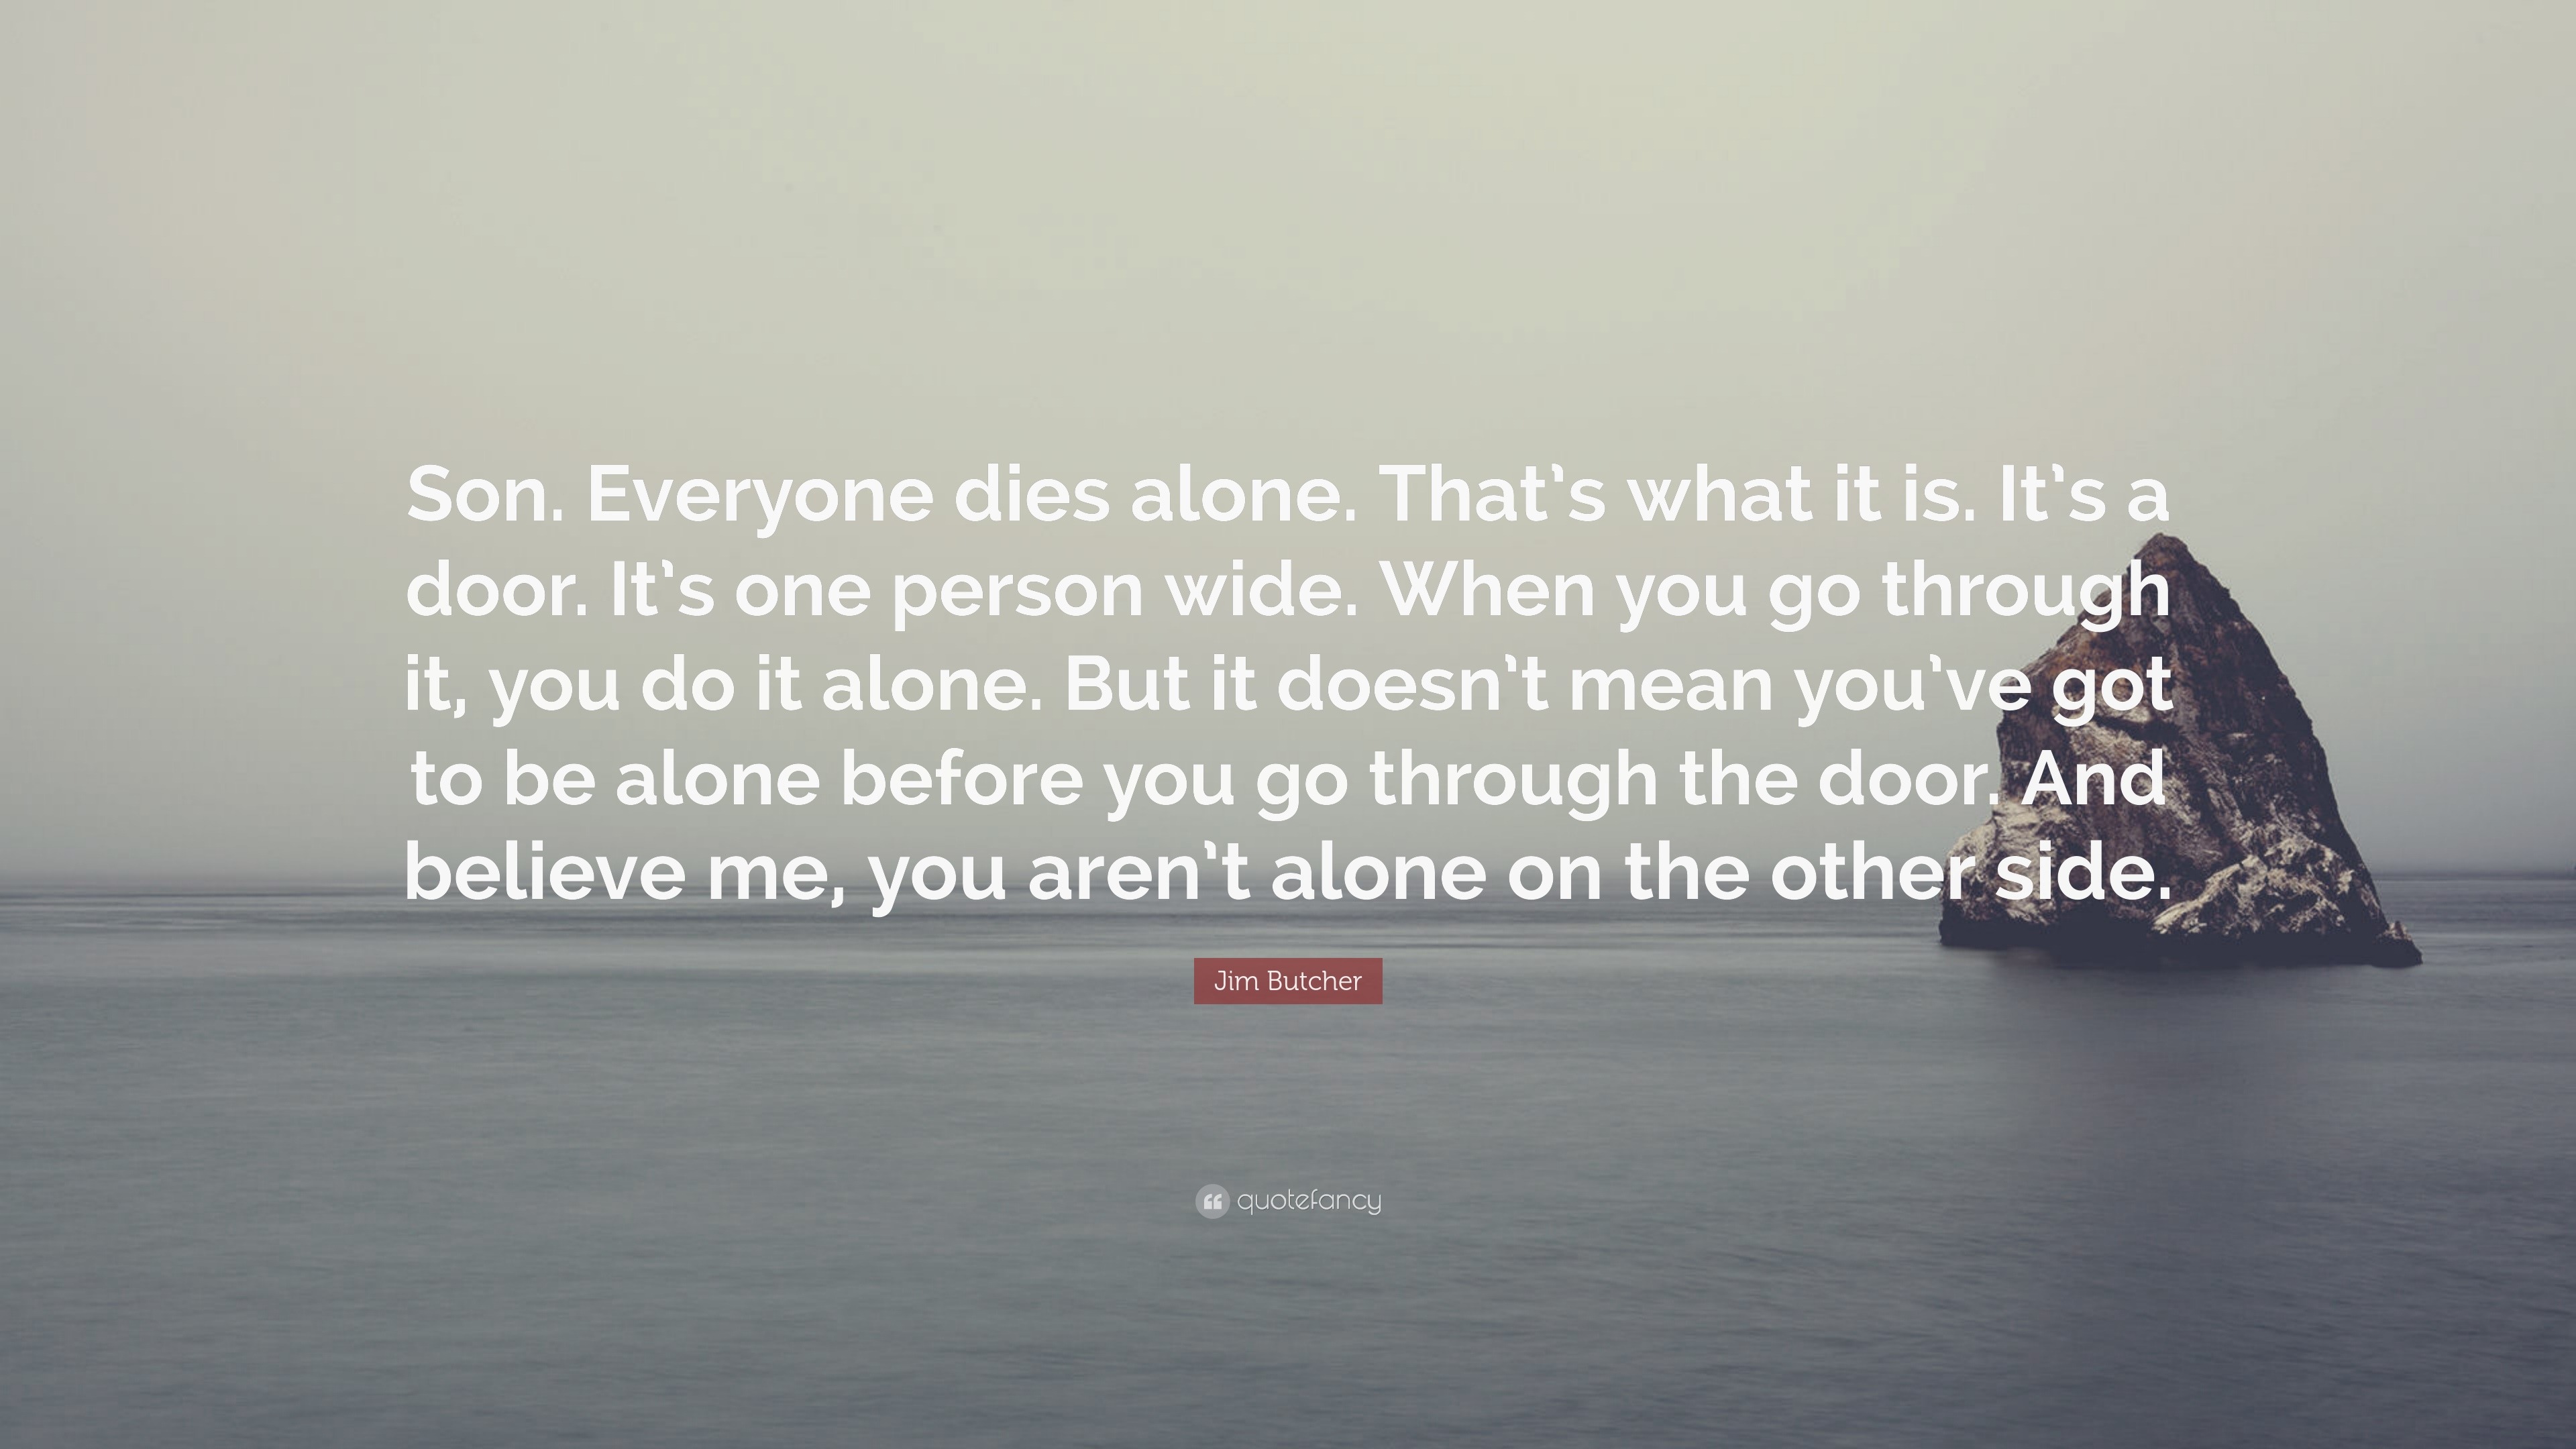 Jim Butcher Quote: "Son. Everyone dies alone. That's what it is. It's a door. It's one person ...